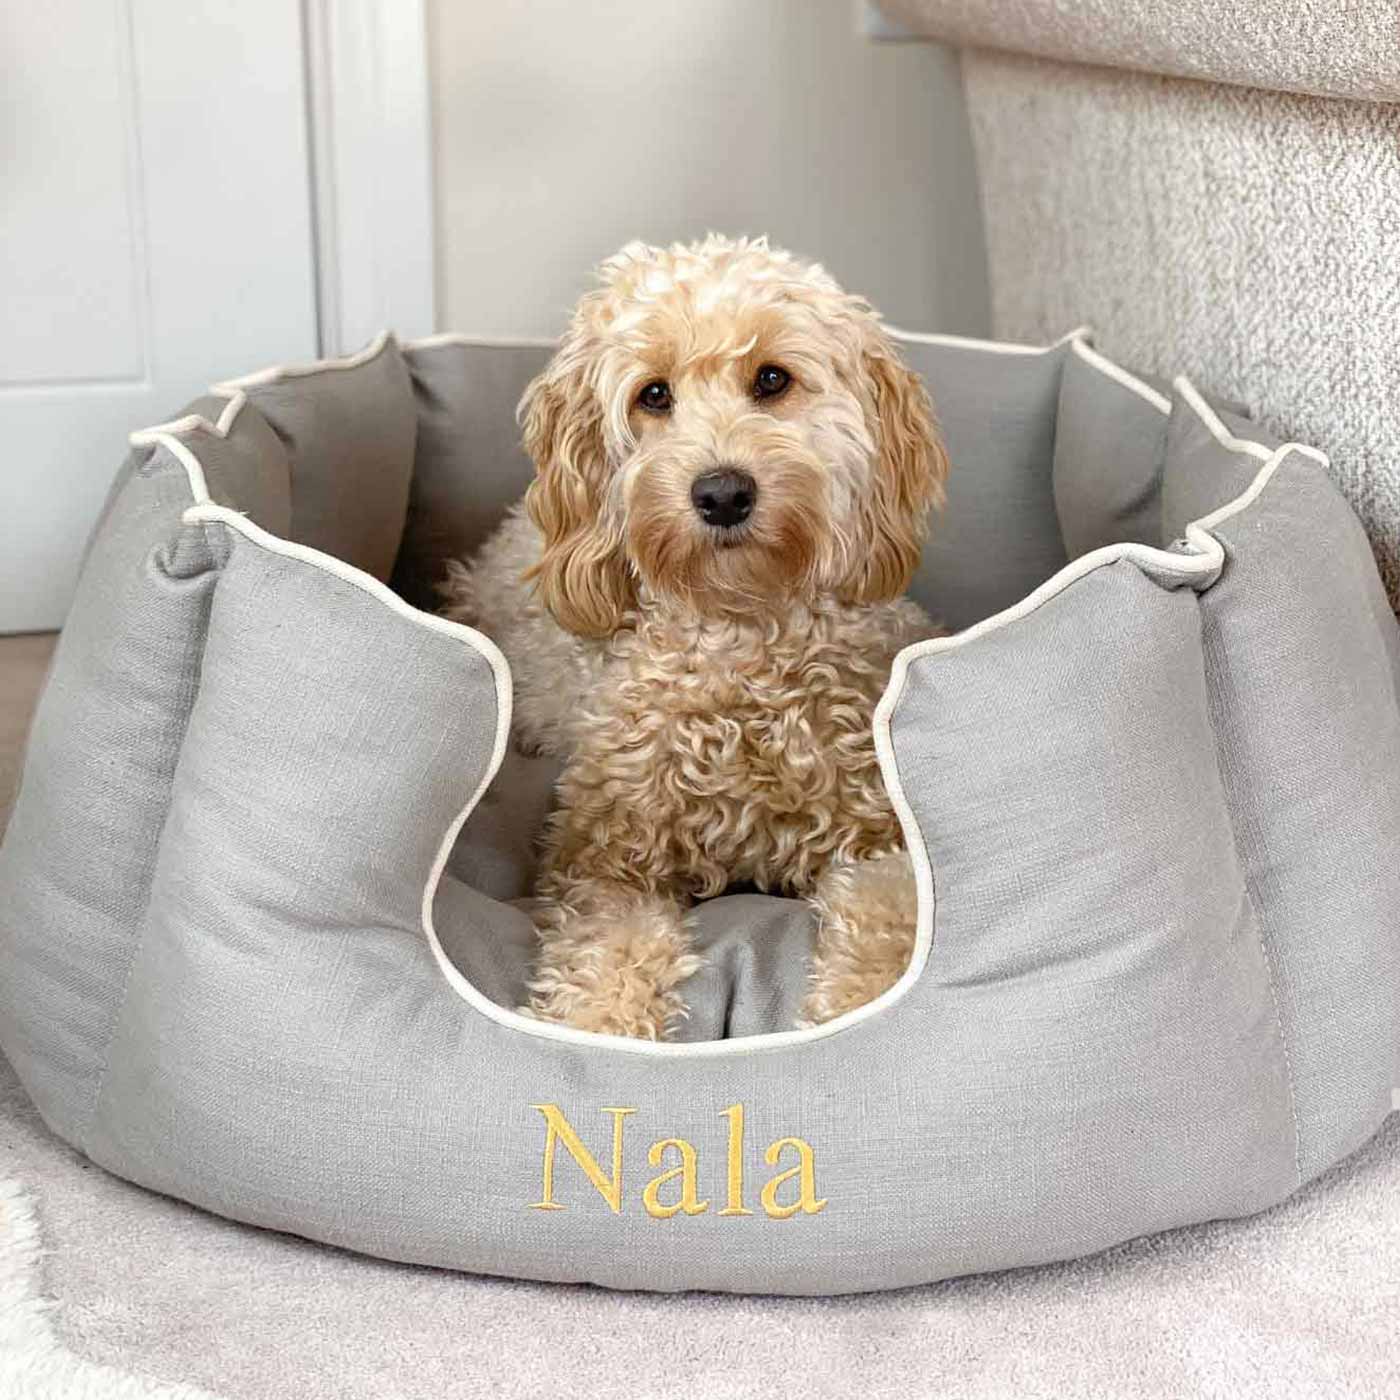 Discover Our Luxurious High Wall Bed For Dogs, Featuring inner pillow with plush teddy fleece on one side To Craft The Perfect Dog Bed In Stunning Stone! Available To Personalise Now at Lords & Labradors